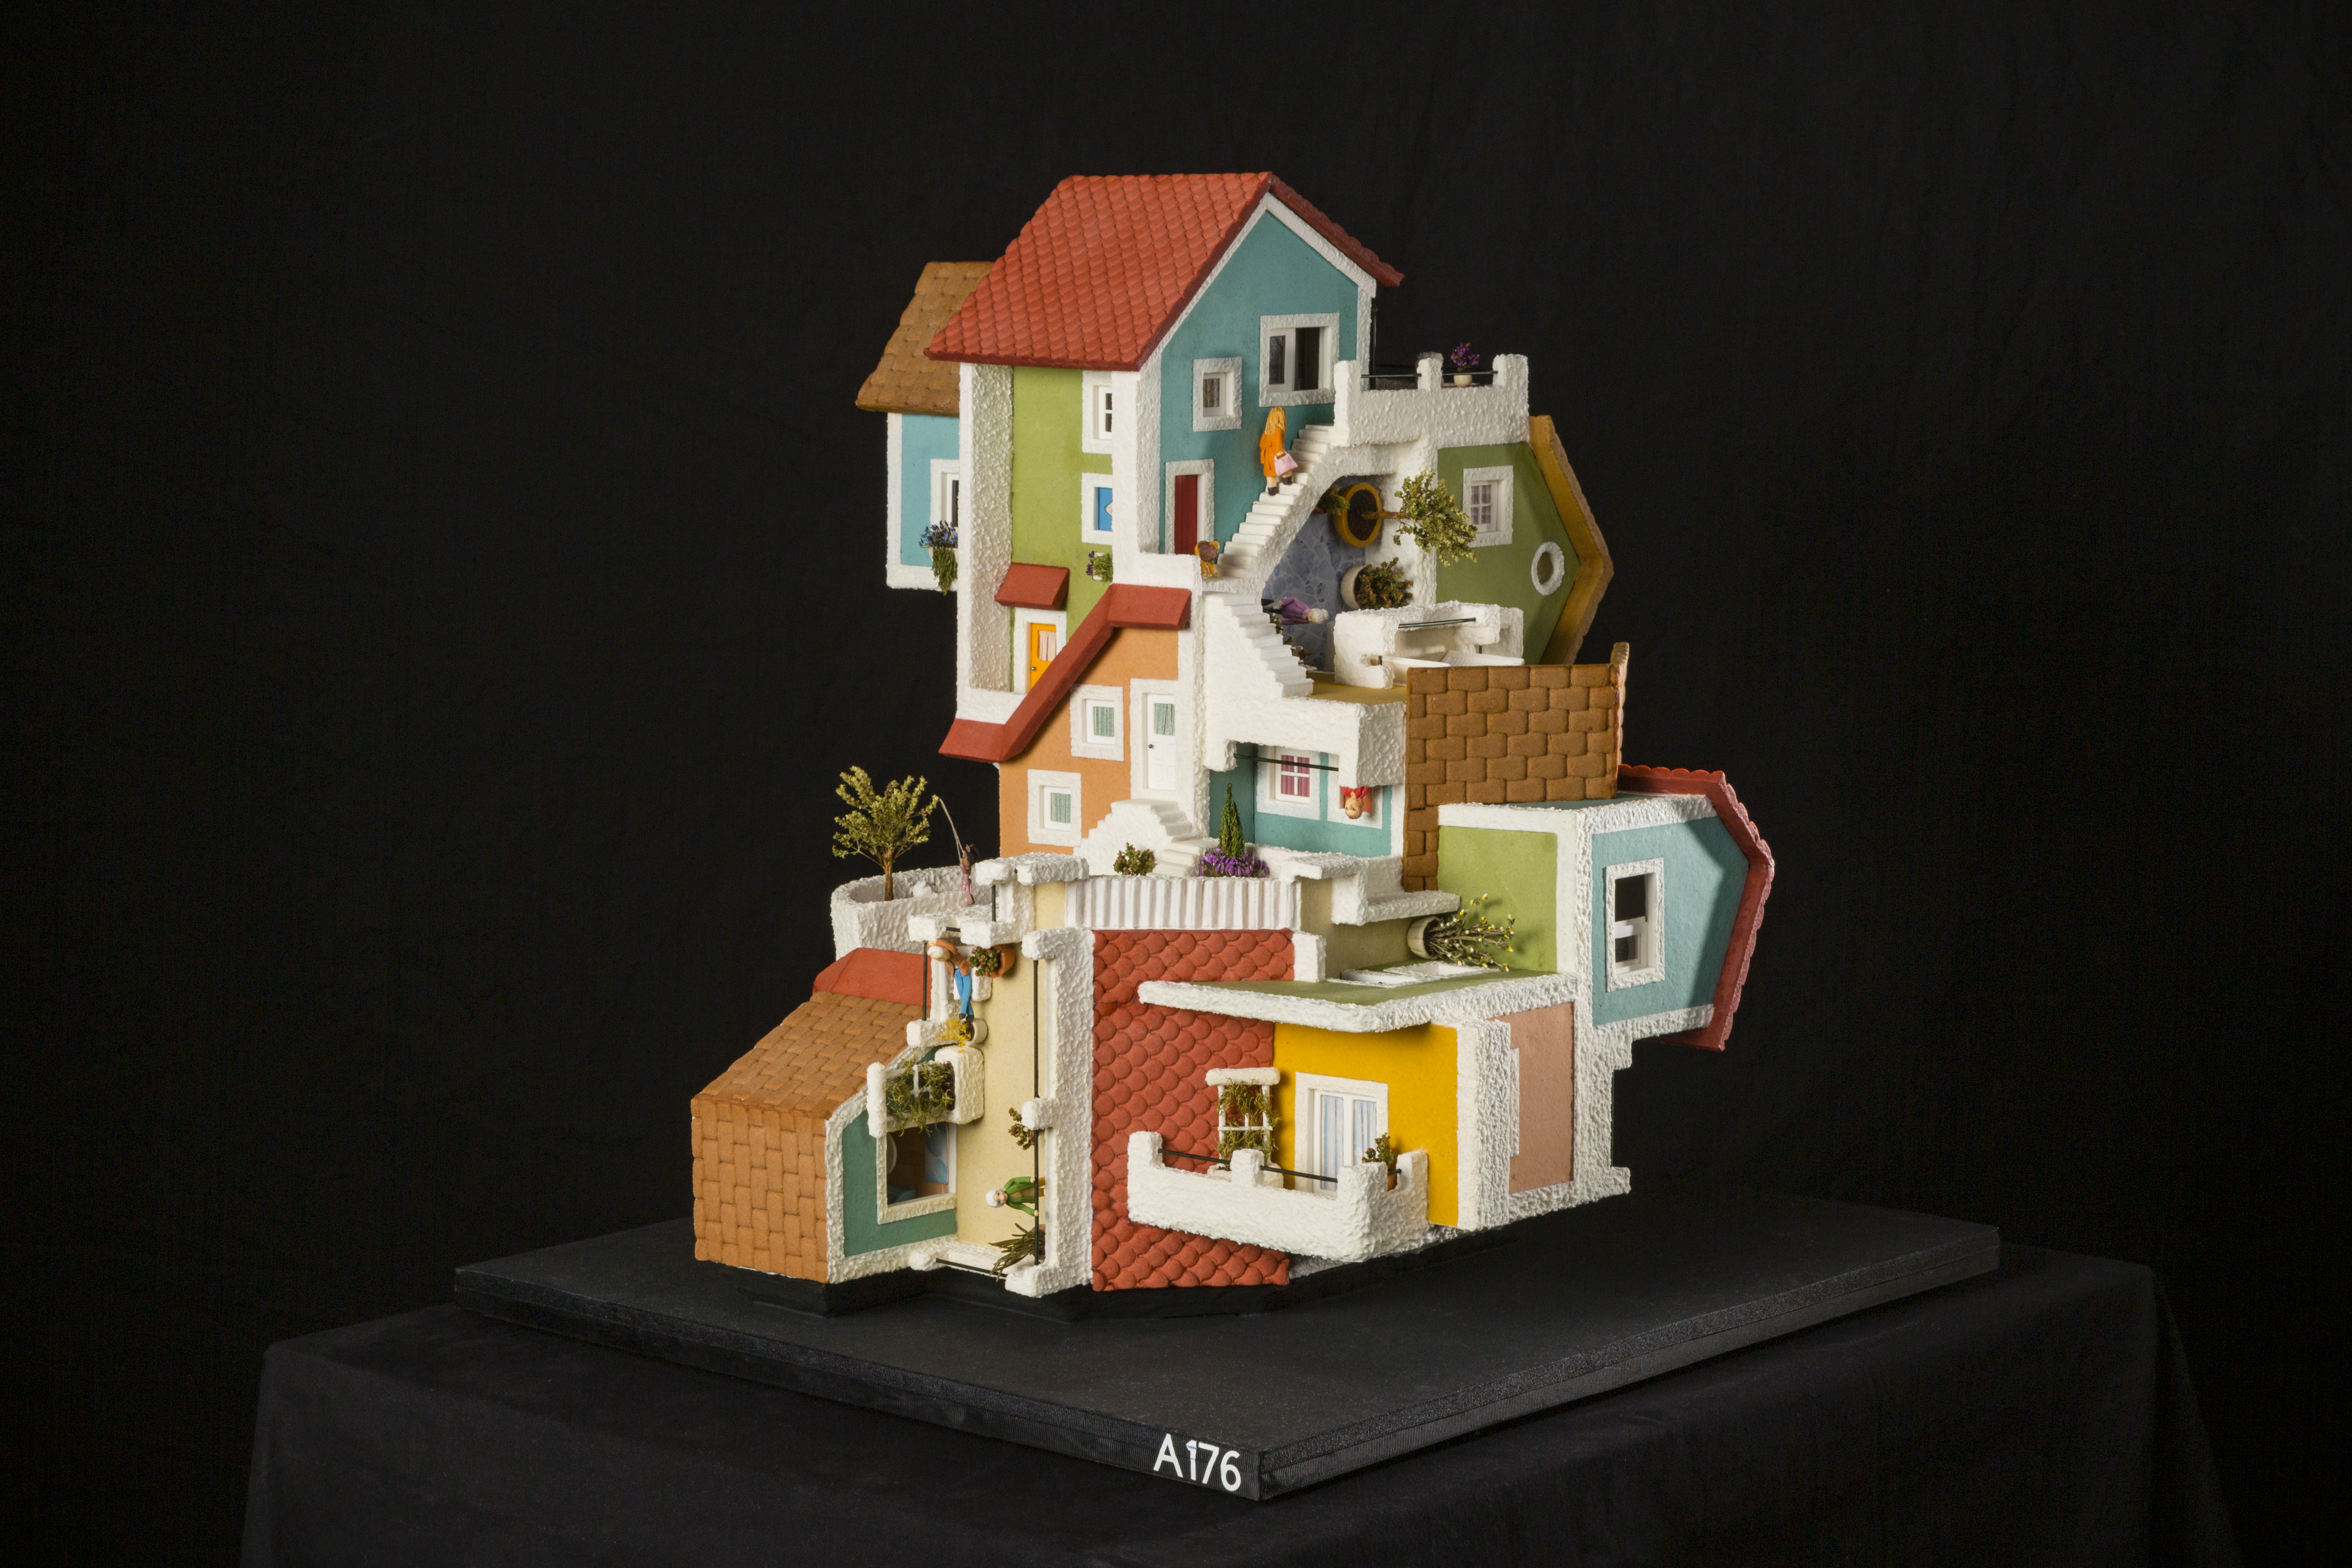 2019 National Gingerbread House Competition Adult Second Place